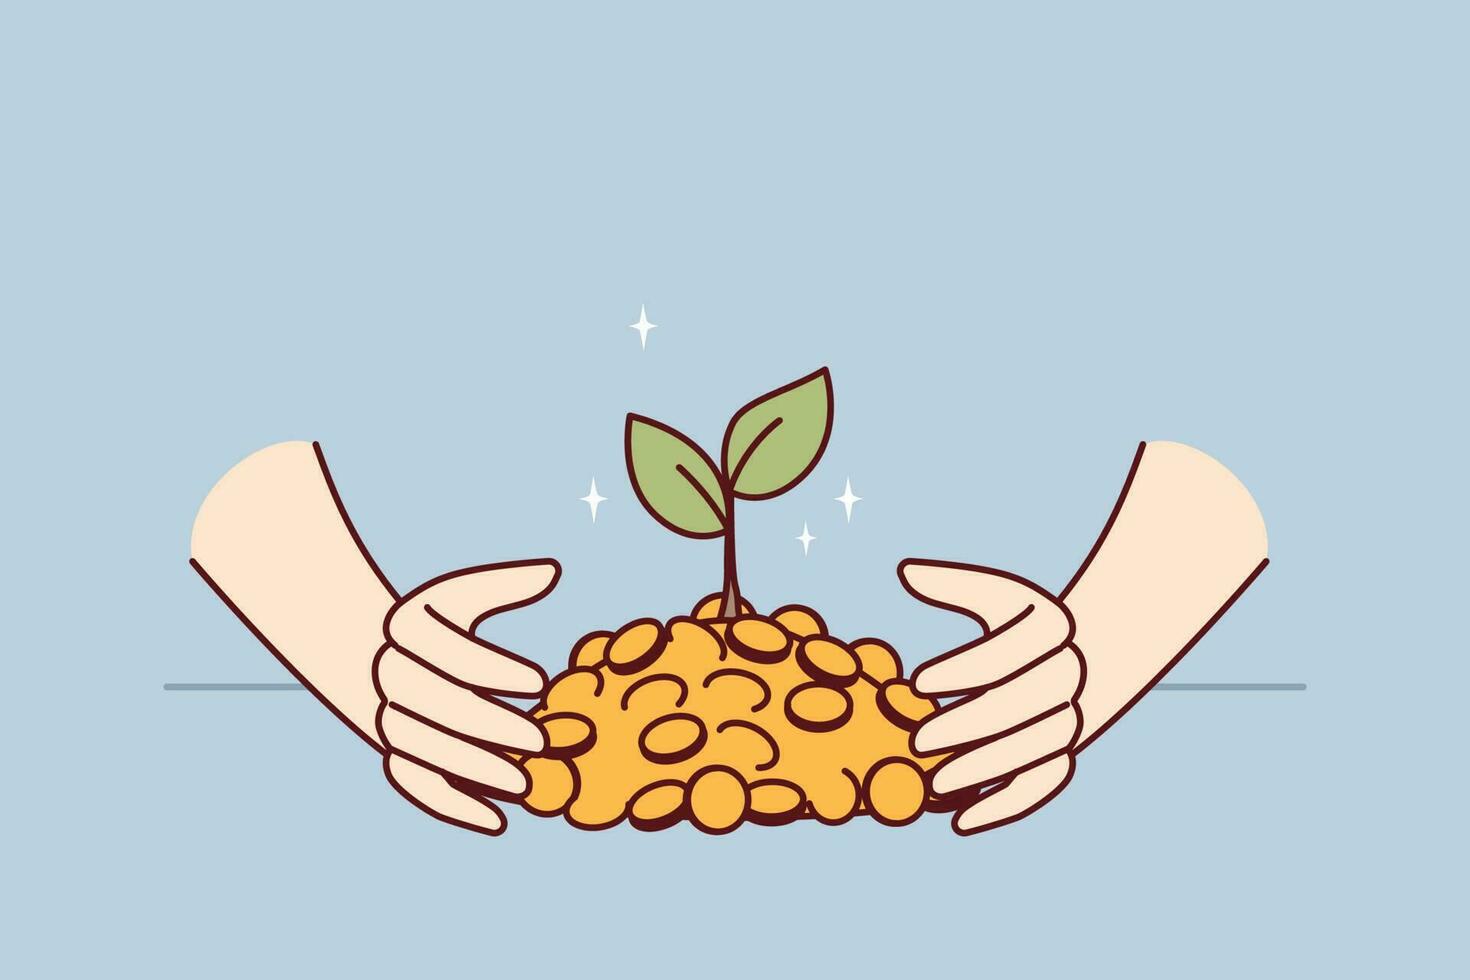 Hands with gold coins and growing tree symbolizing dividends on accumulated capital and profitable investment. Gold with green leaves as metaphor for financial literacy and ability to invest or trade vector